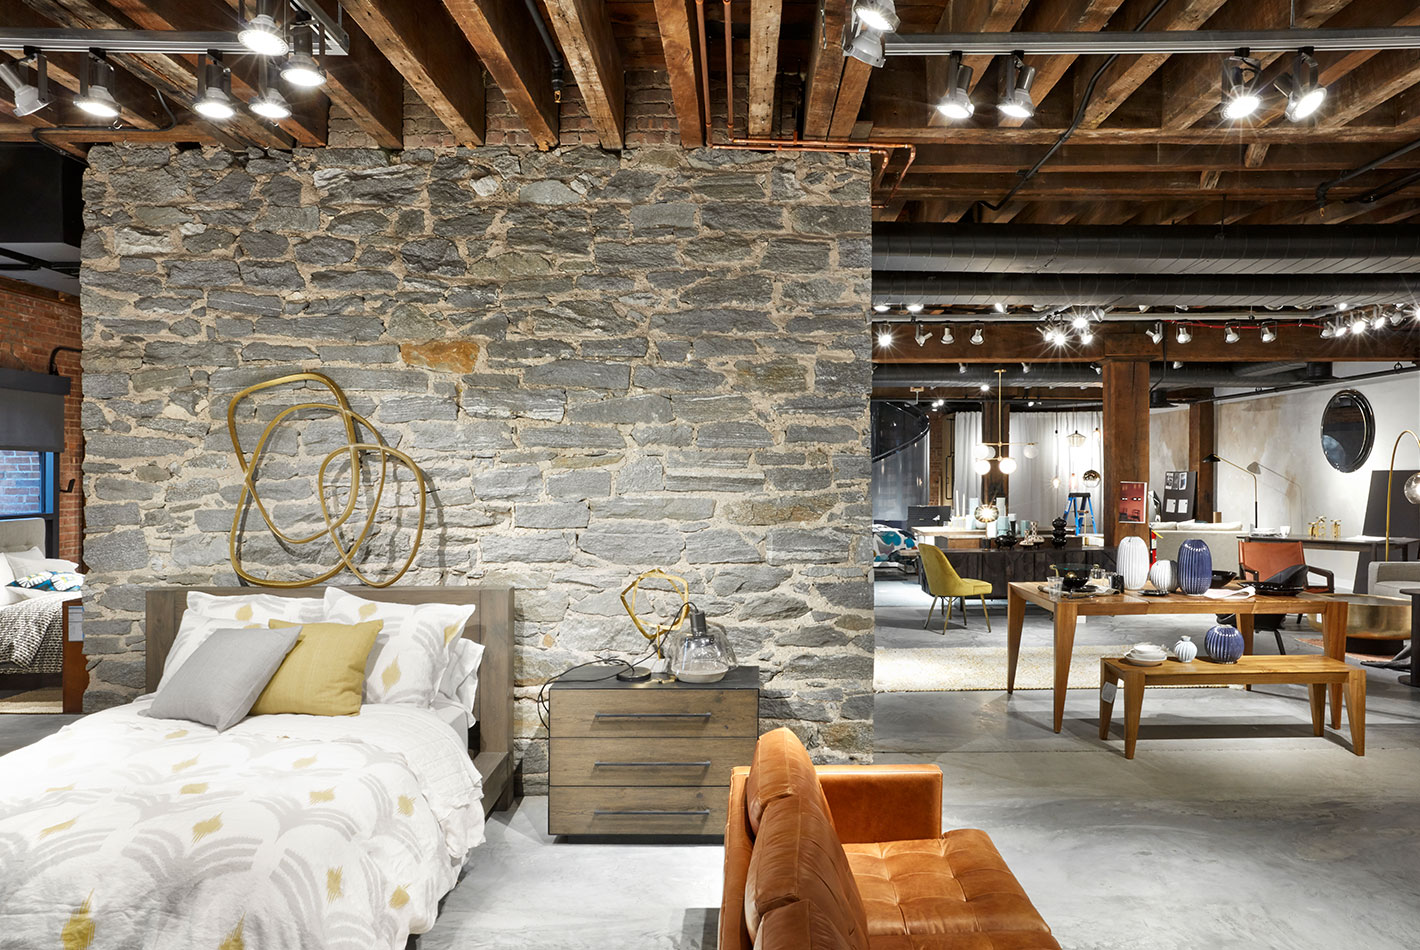 An original stone wall rises through the center of furniture vignettes in West Elm Headquarters. The original wood beams are featured on the ceiling.